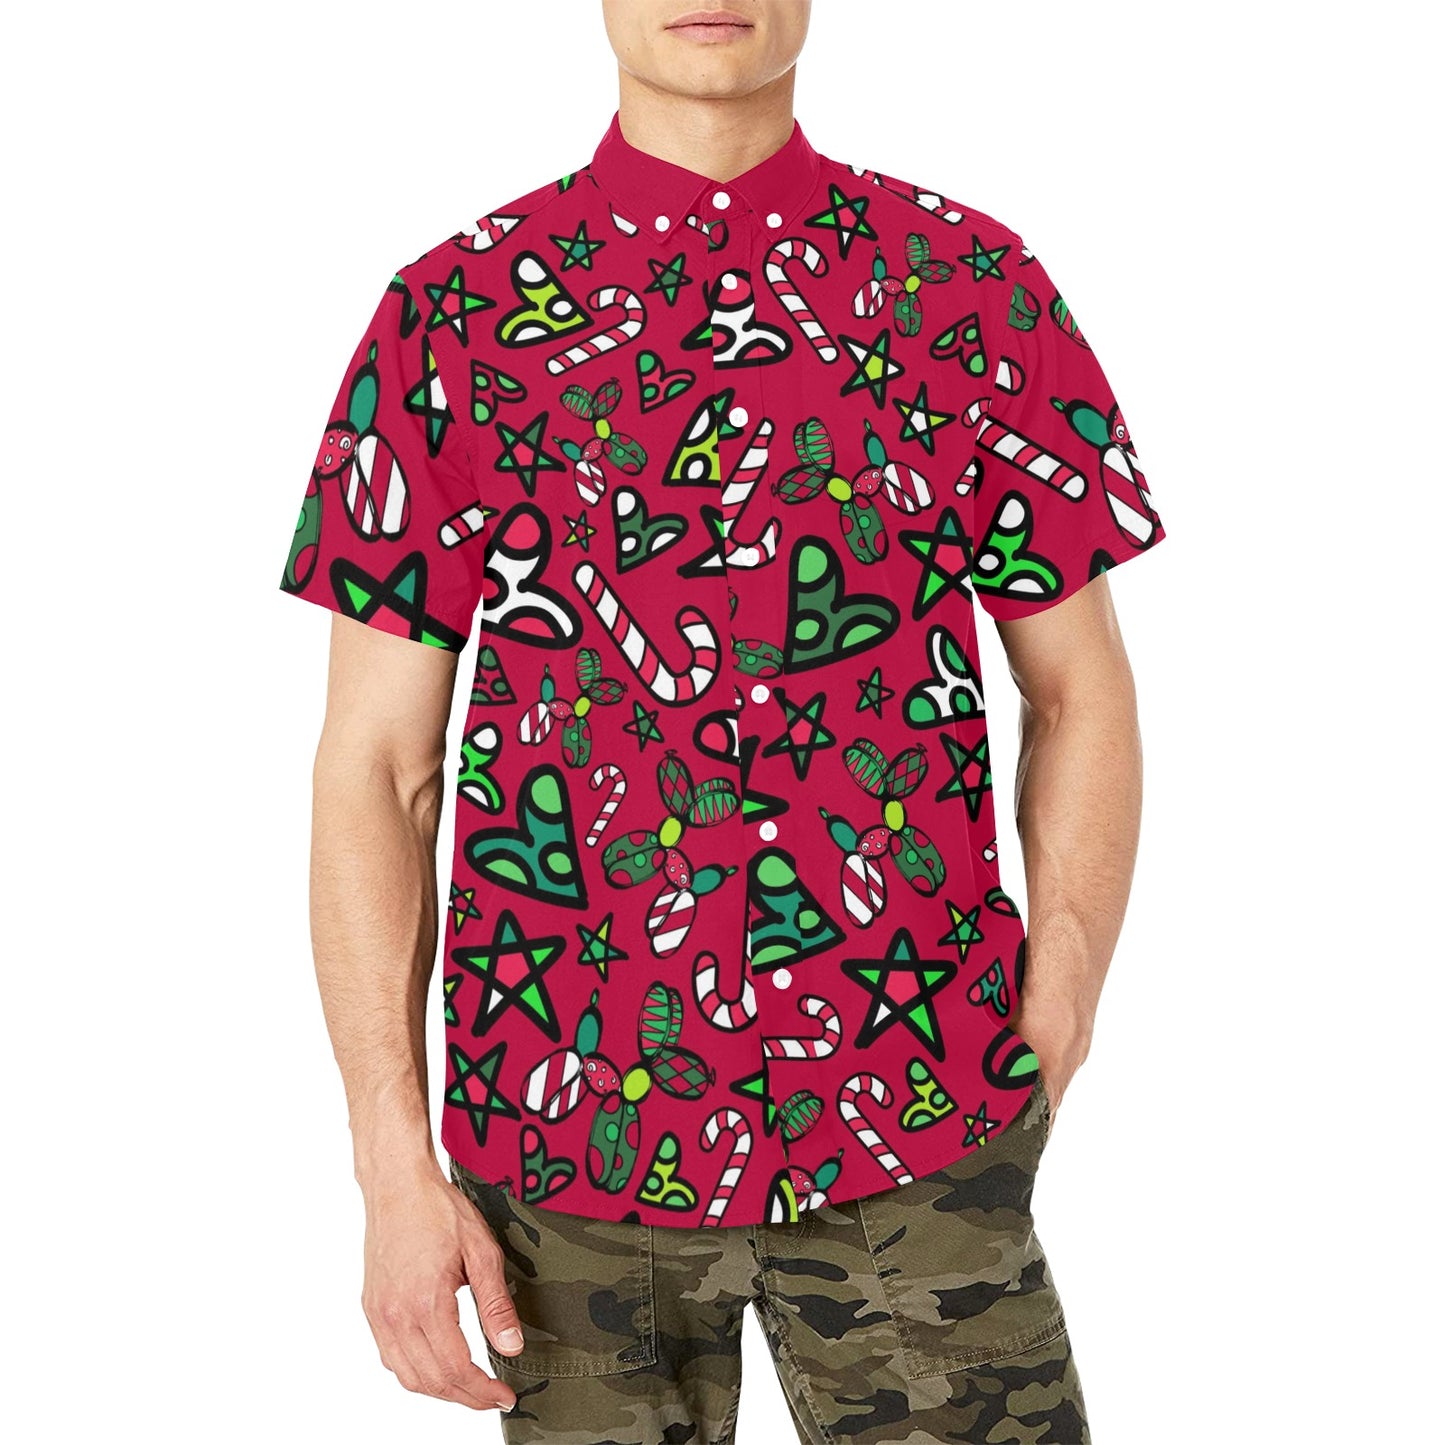 Red Christmas shirt with pockets for balloon twisting